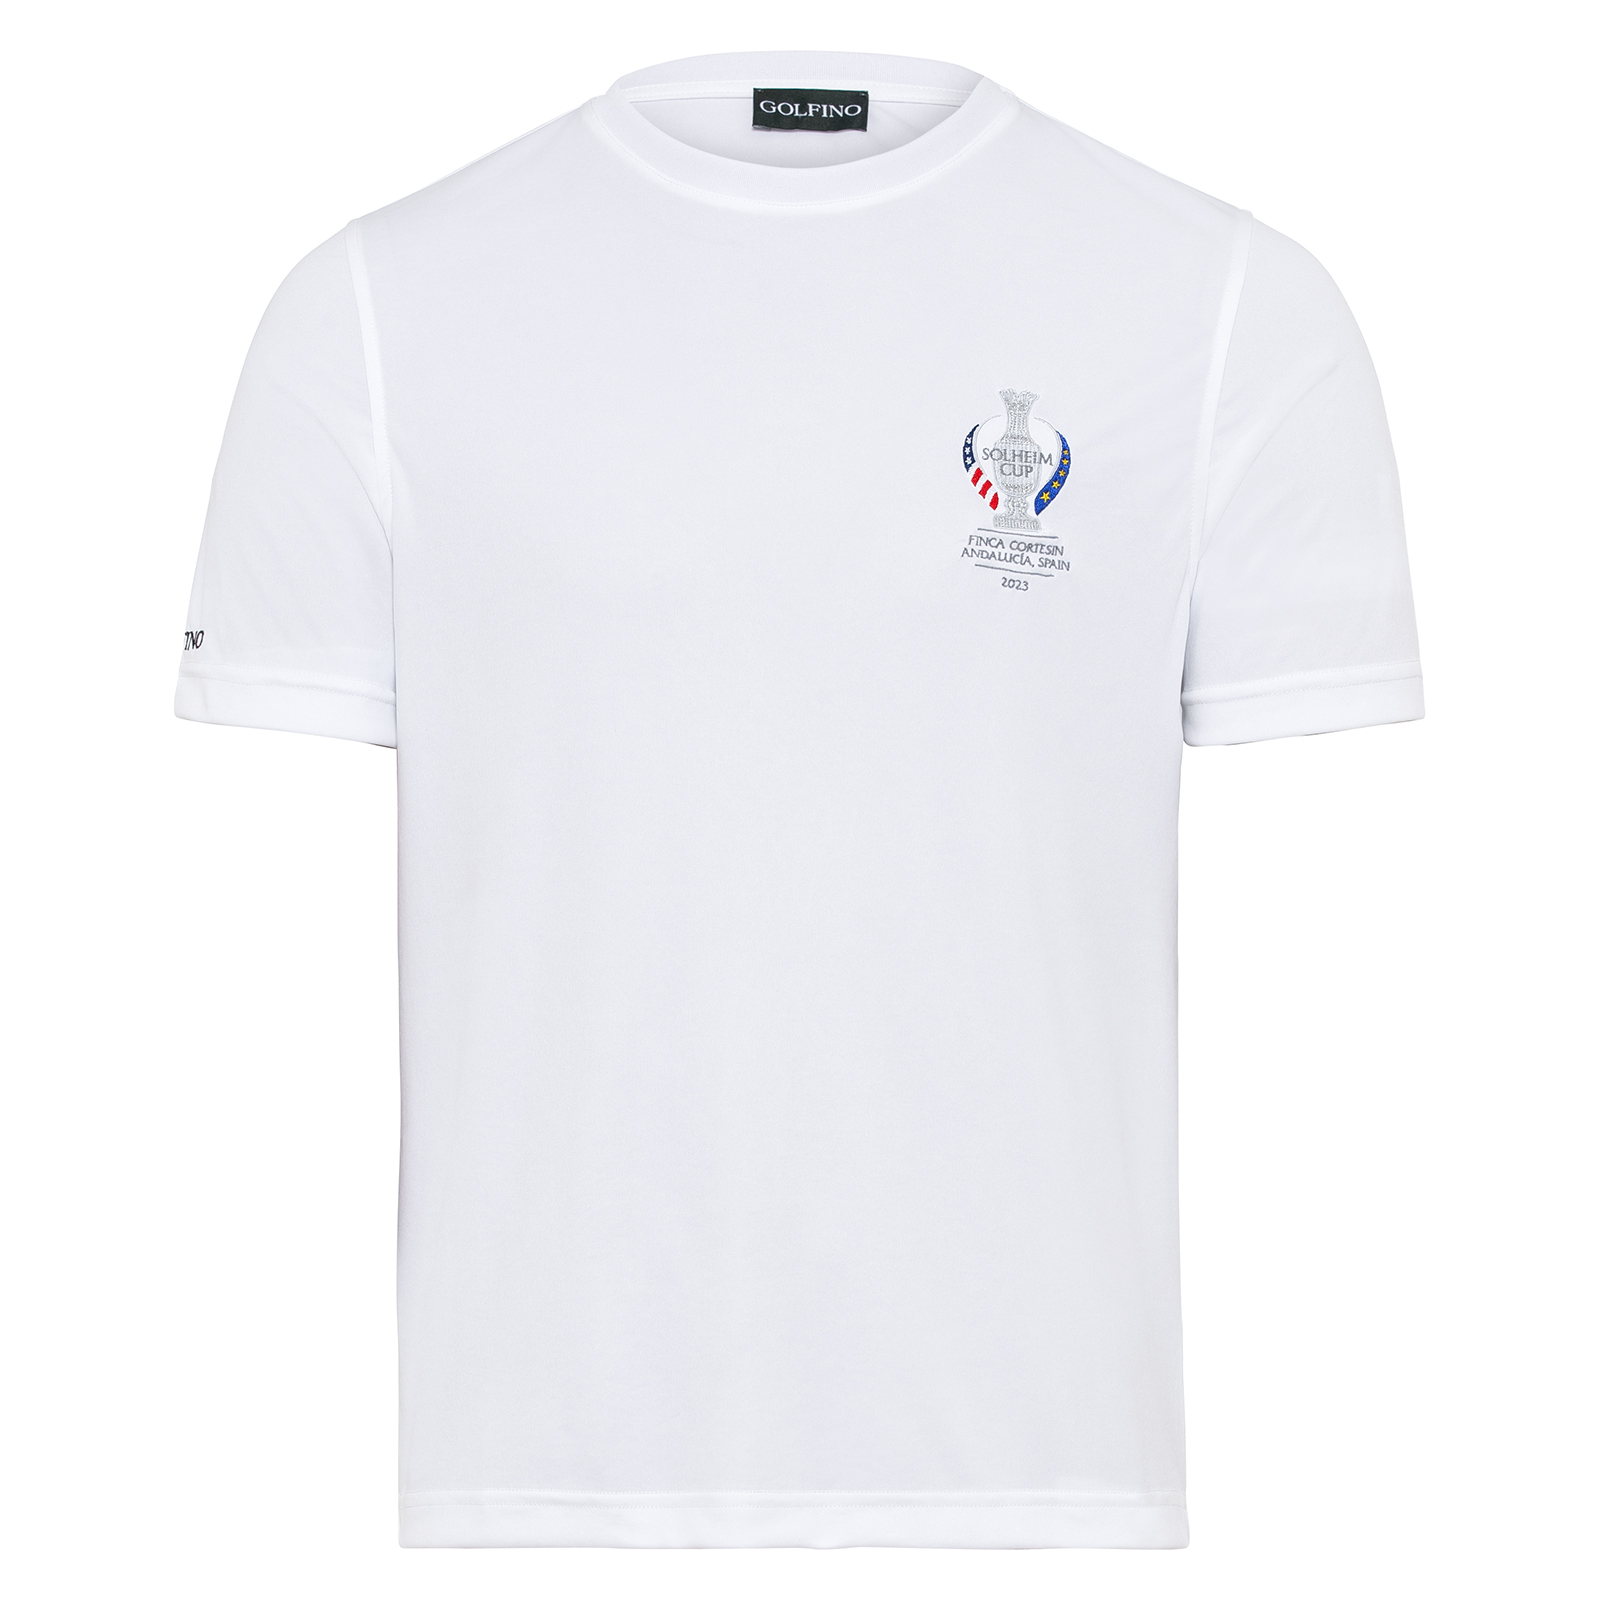 Ladies' soft golf T-shirt with sun protection in Solheim Cup design 